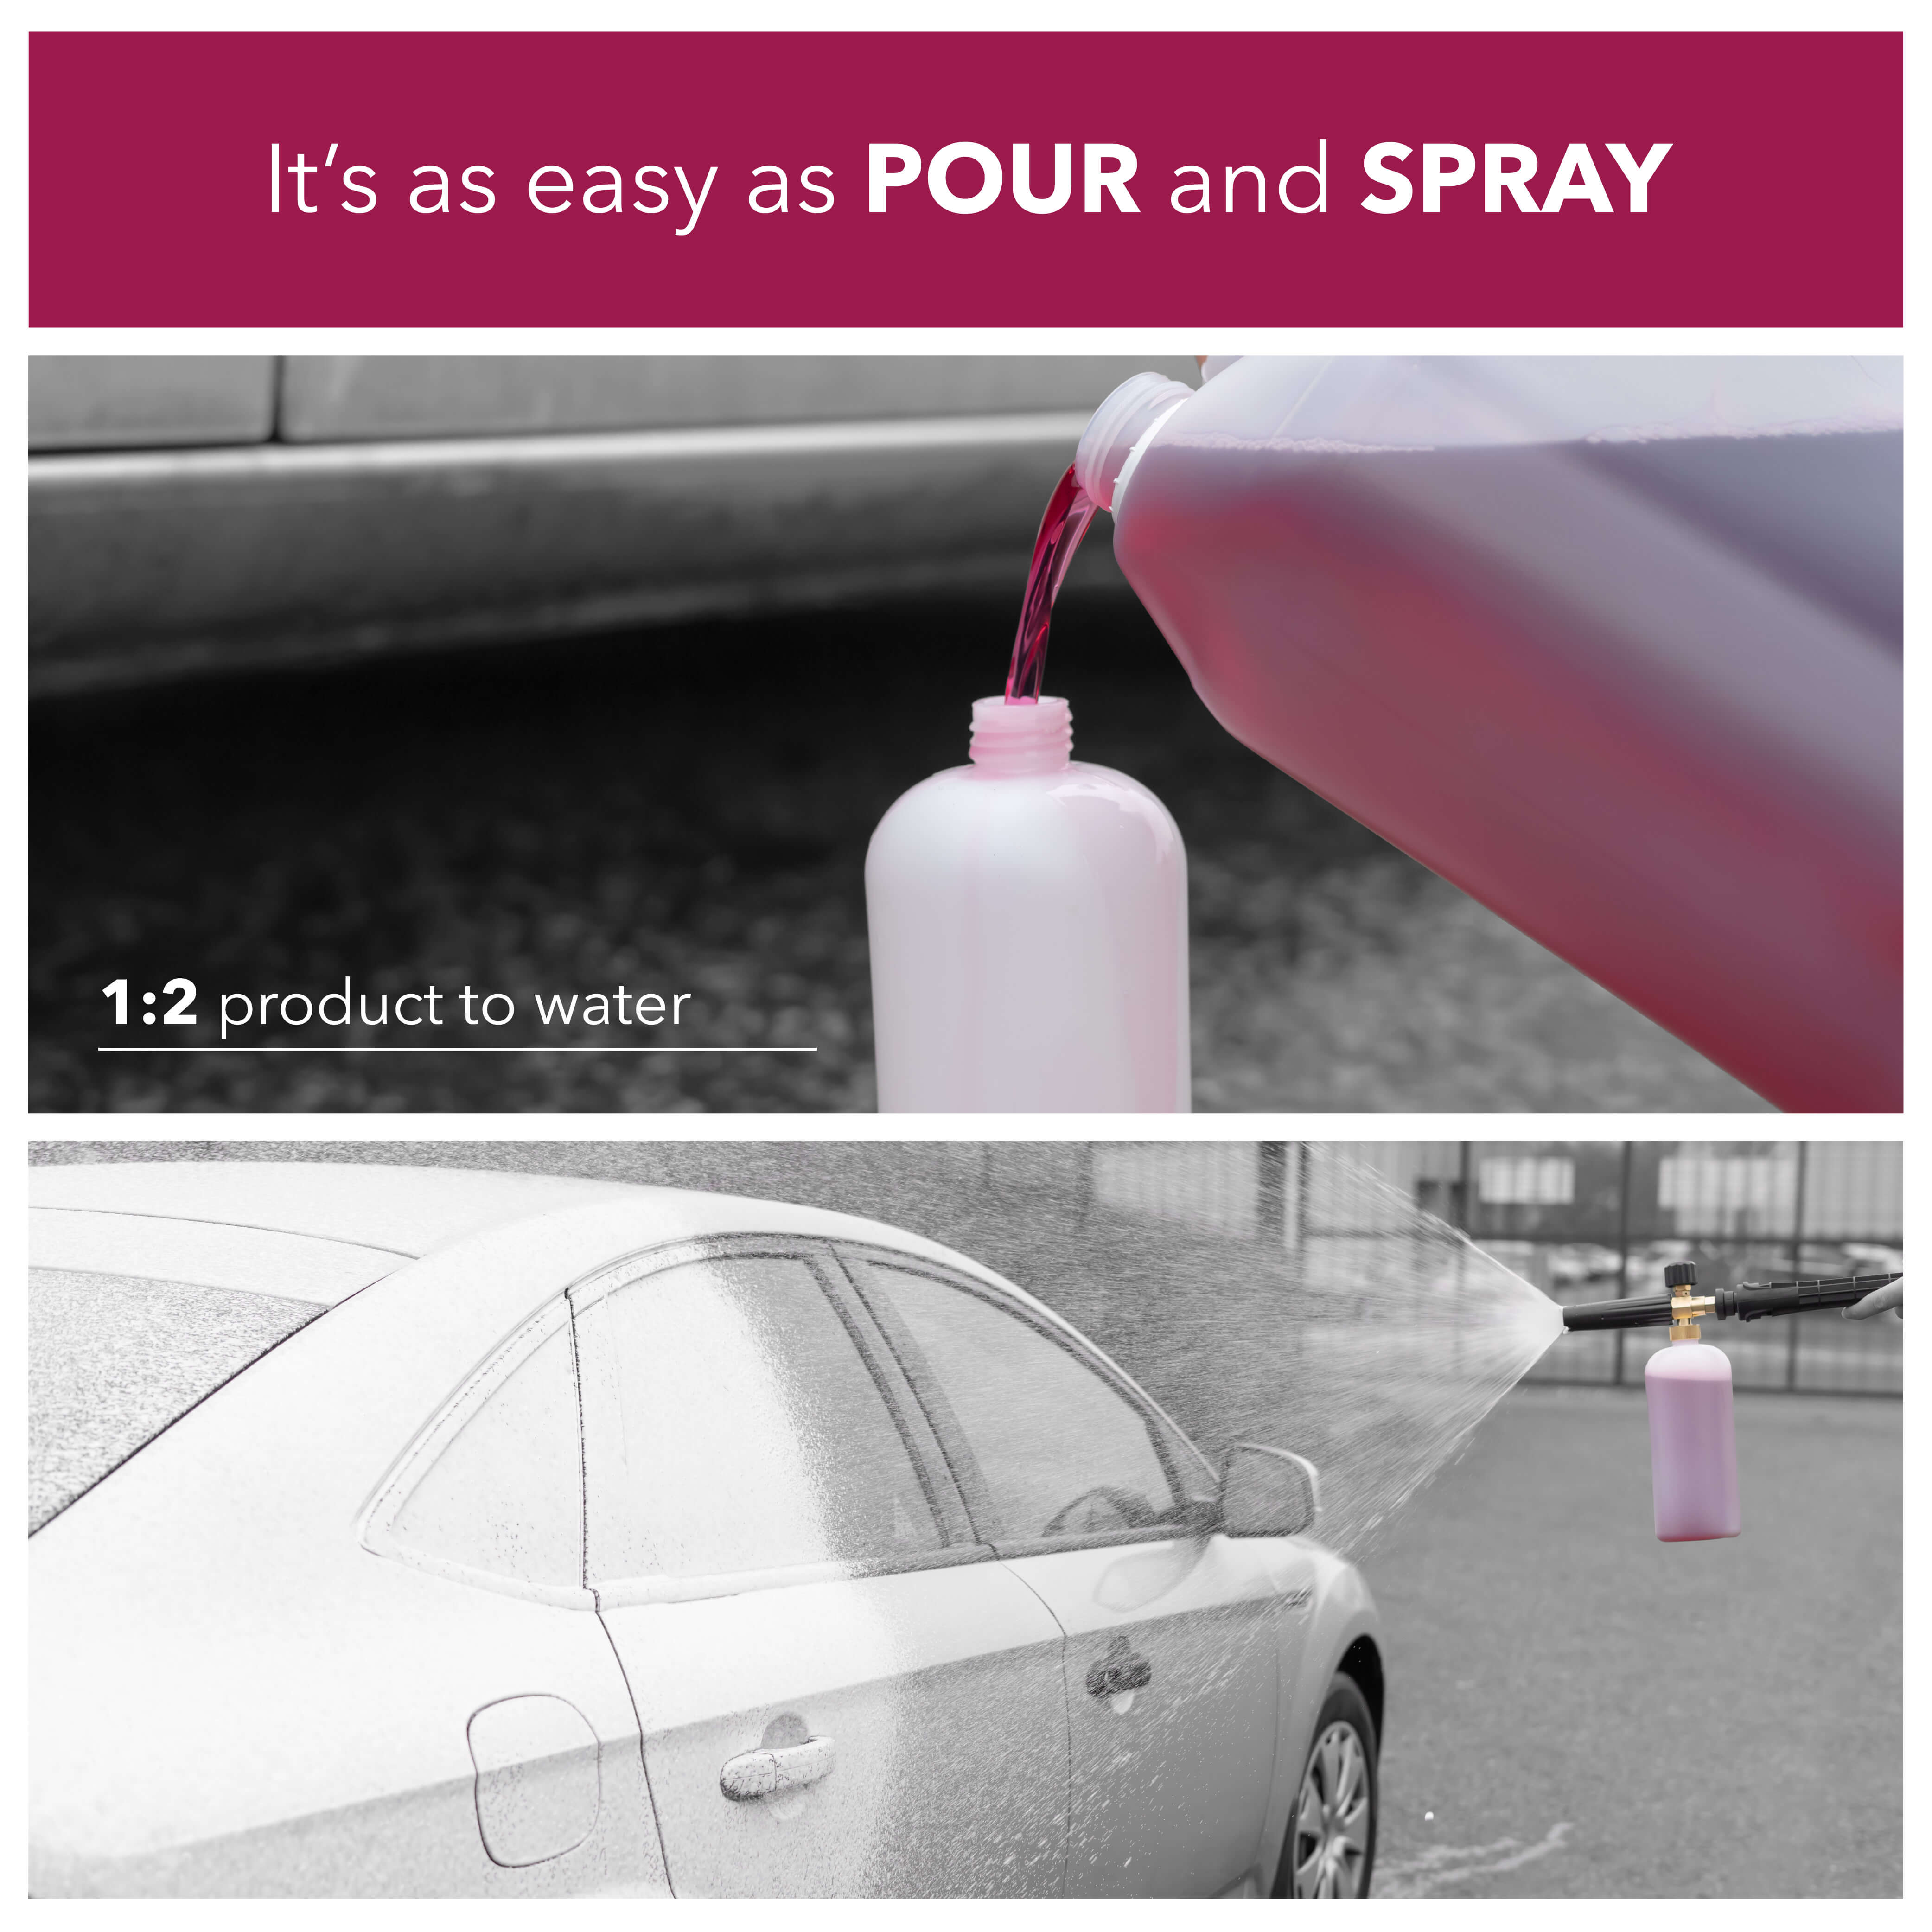 It's as easy as pour and spray, 1:2 product to water